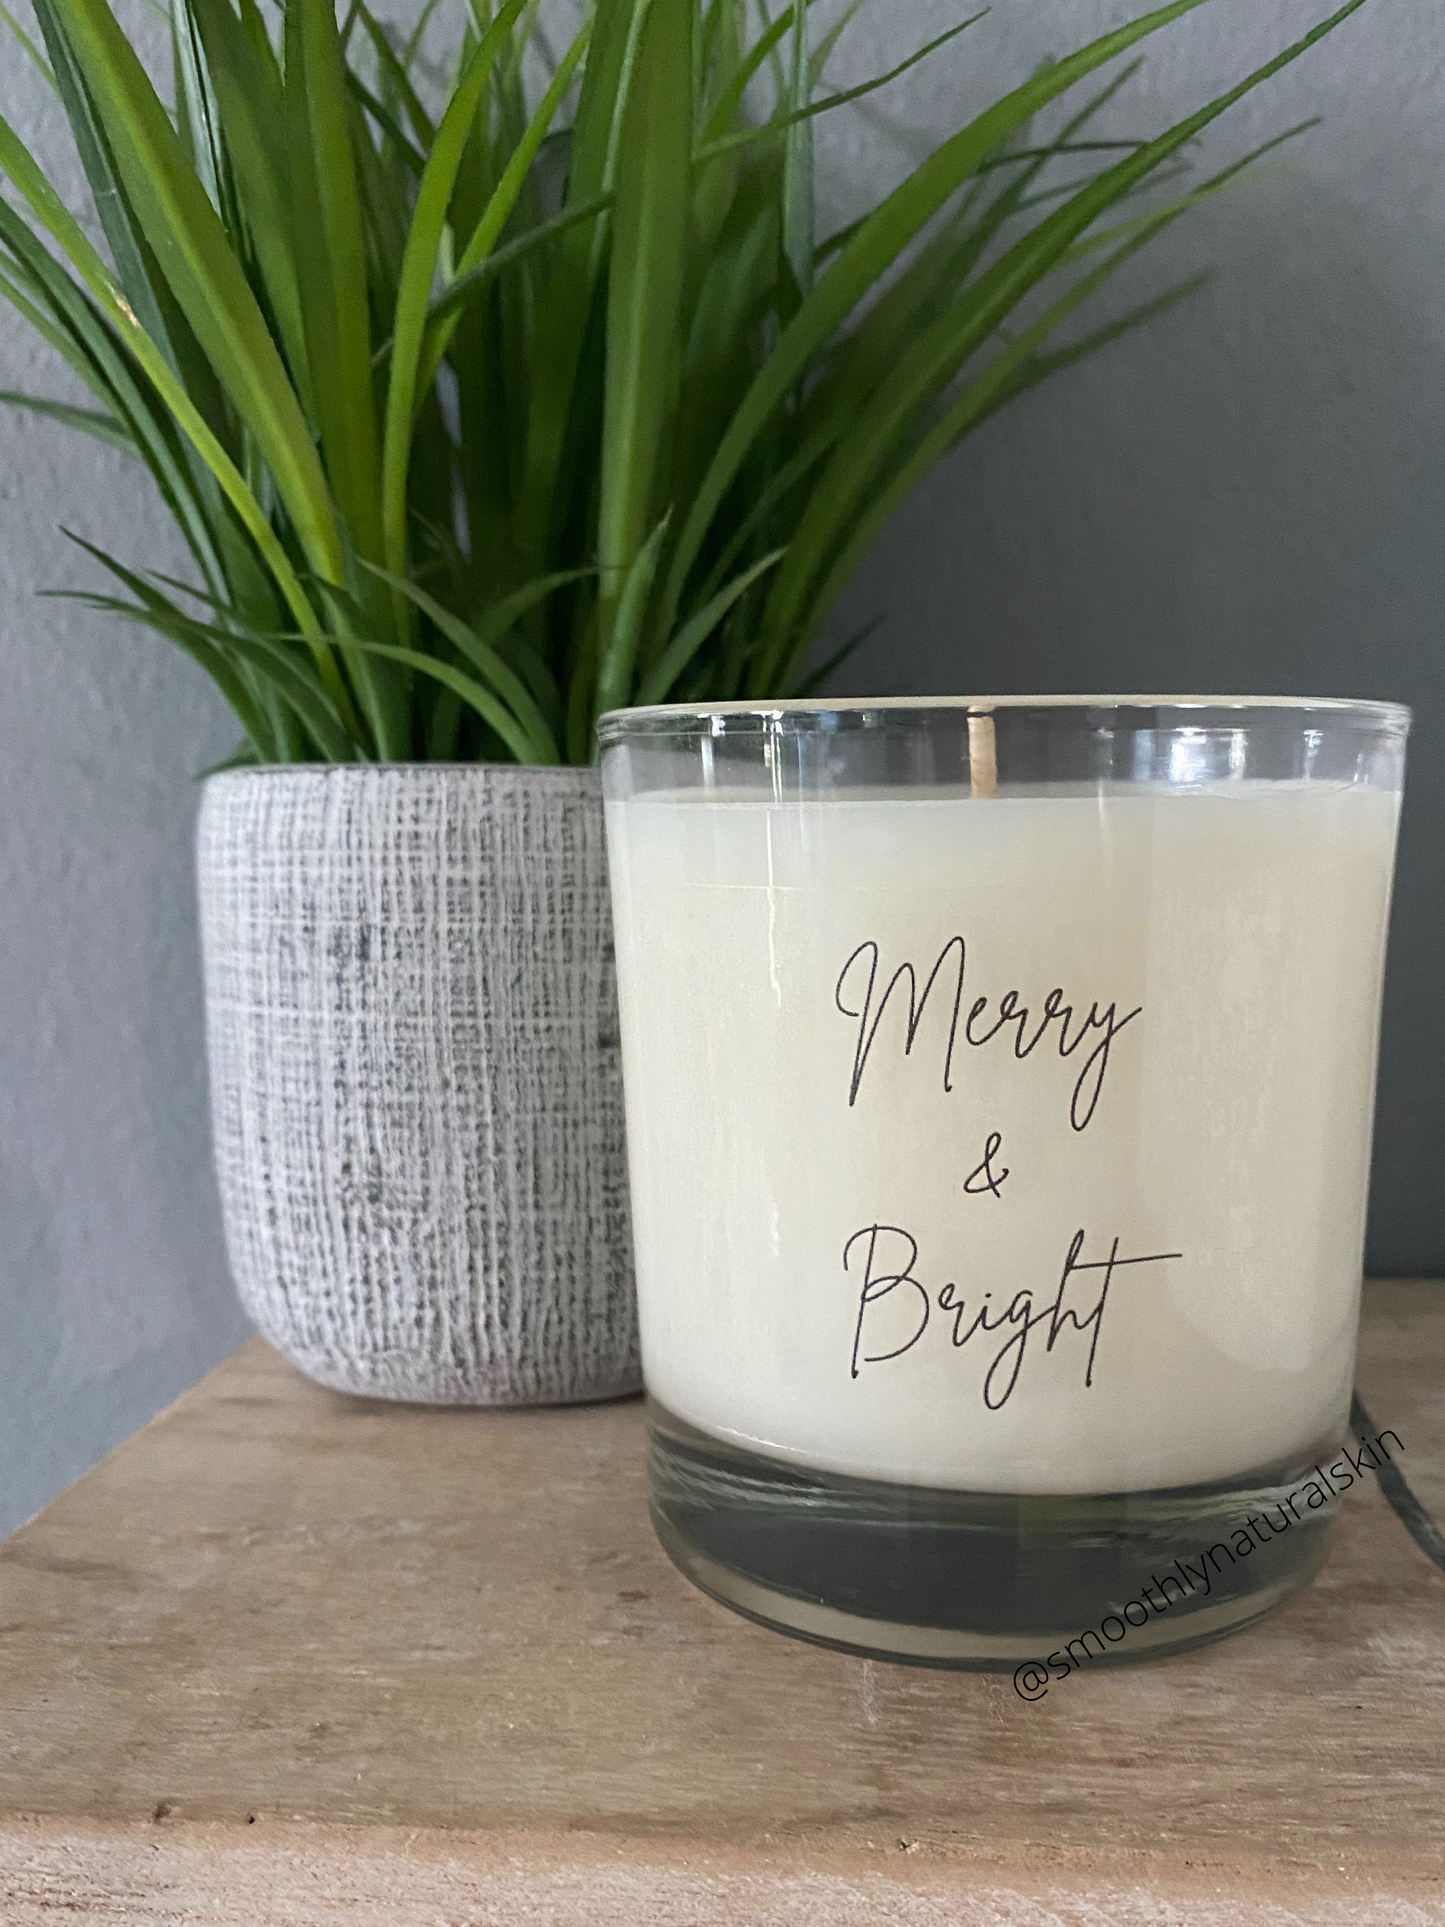 Merry & Bright candle, is a perfect gift for you or that special friend. Smoothly Natural Skin